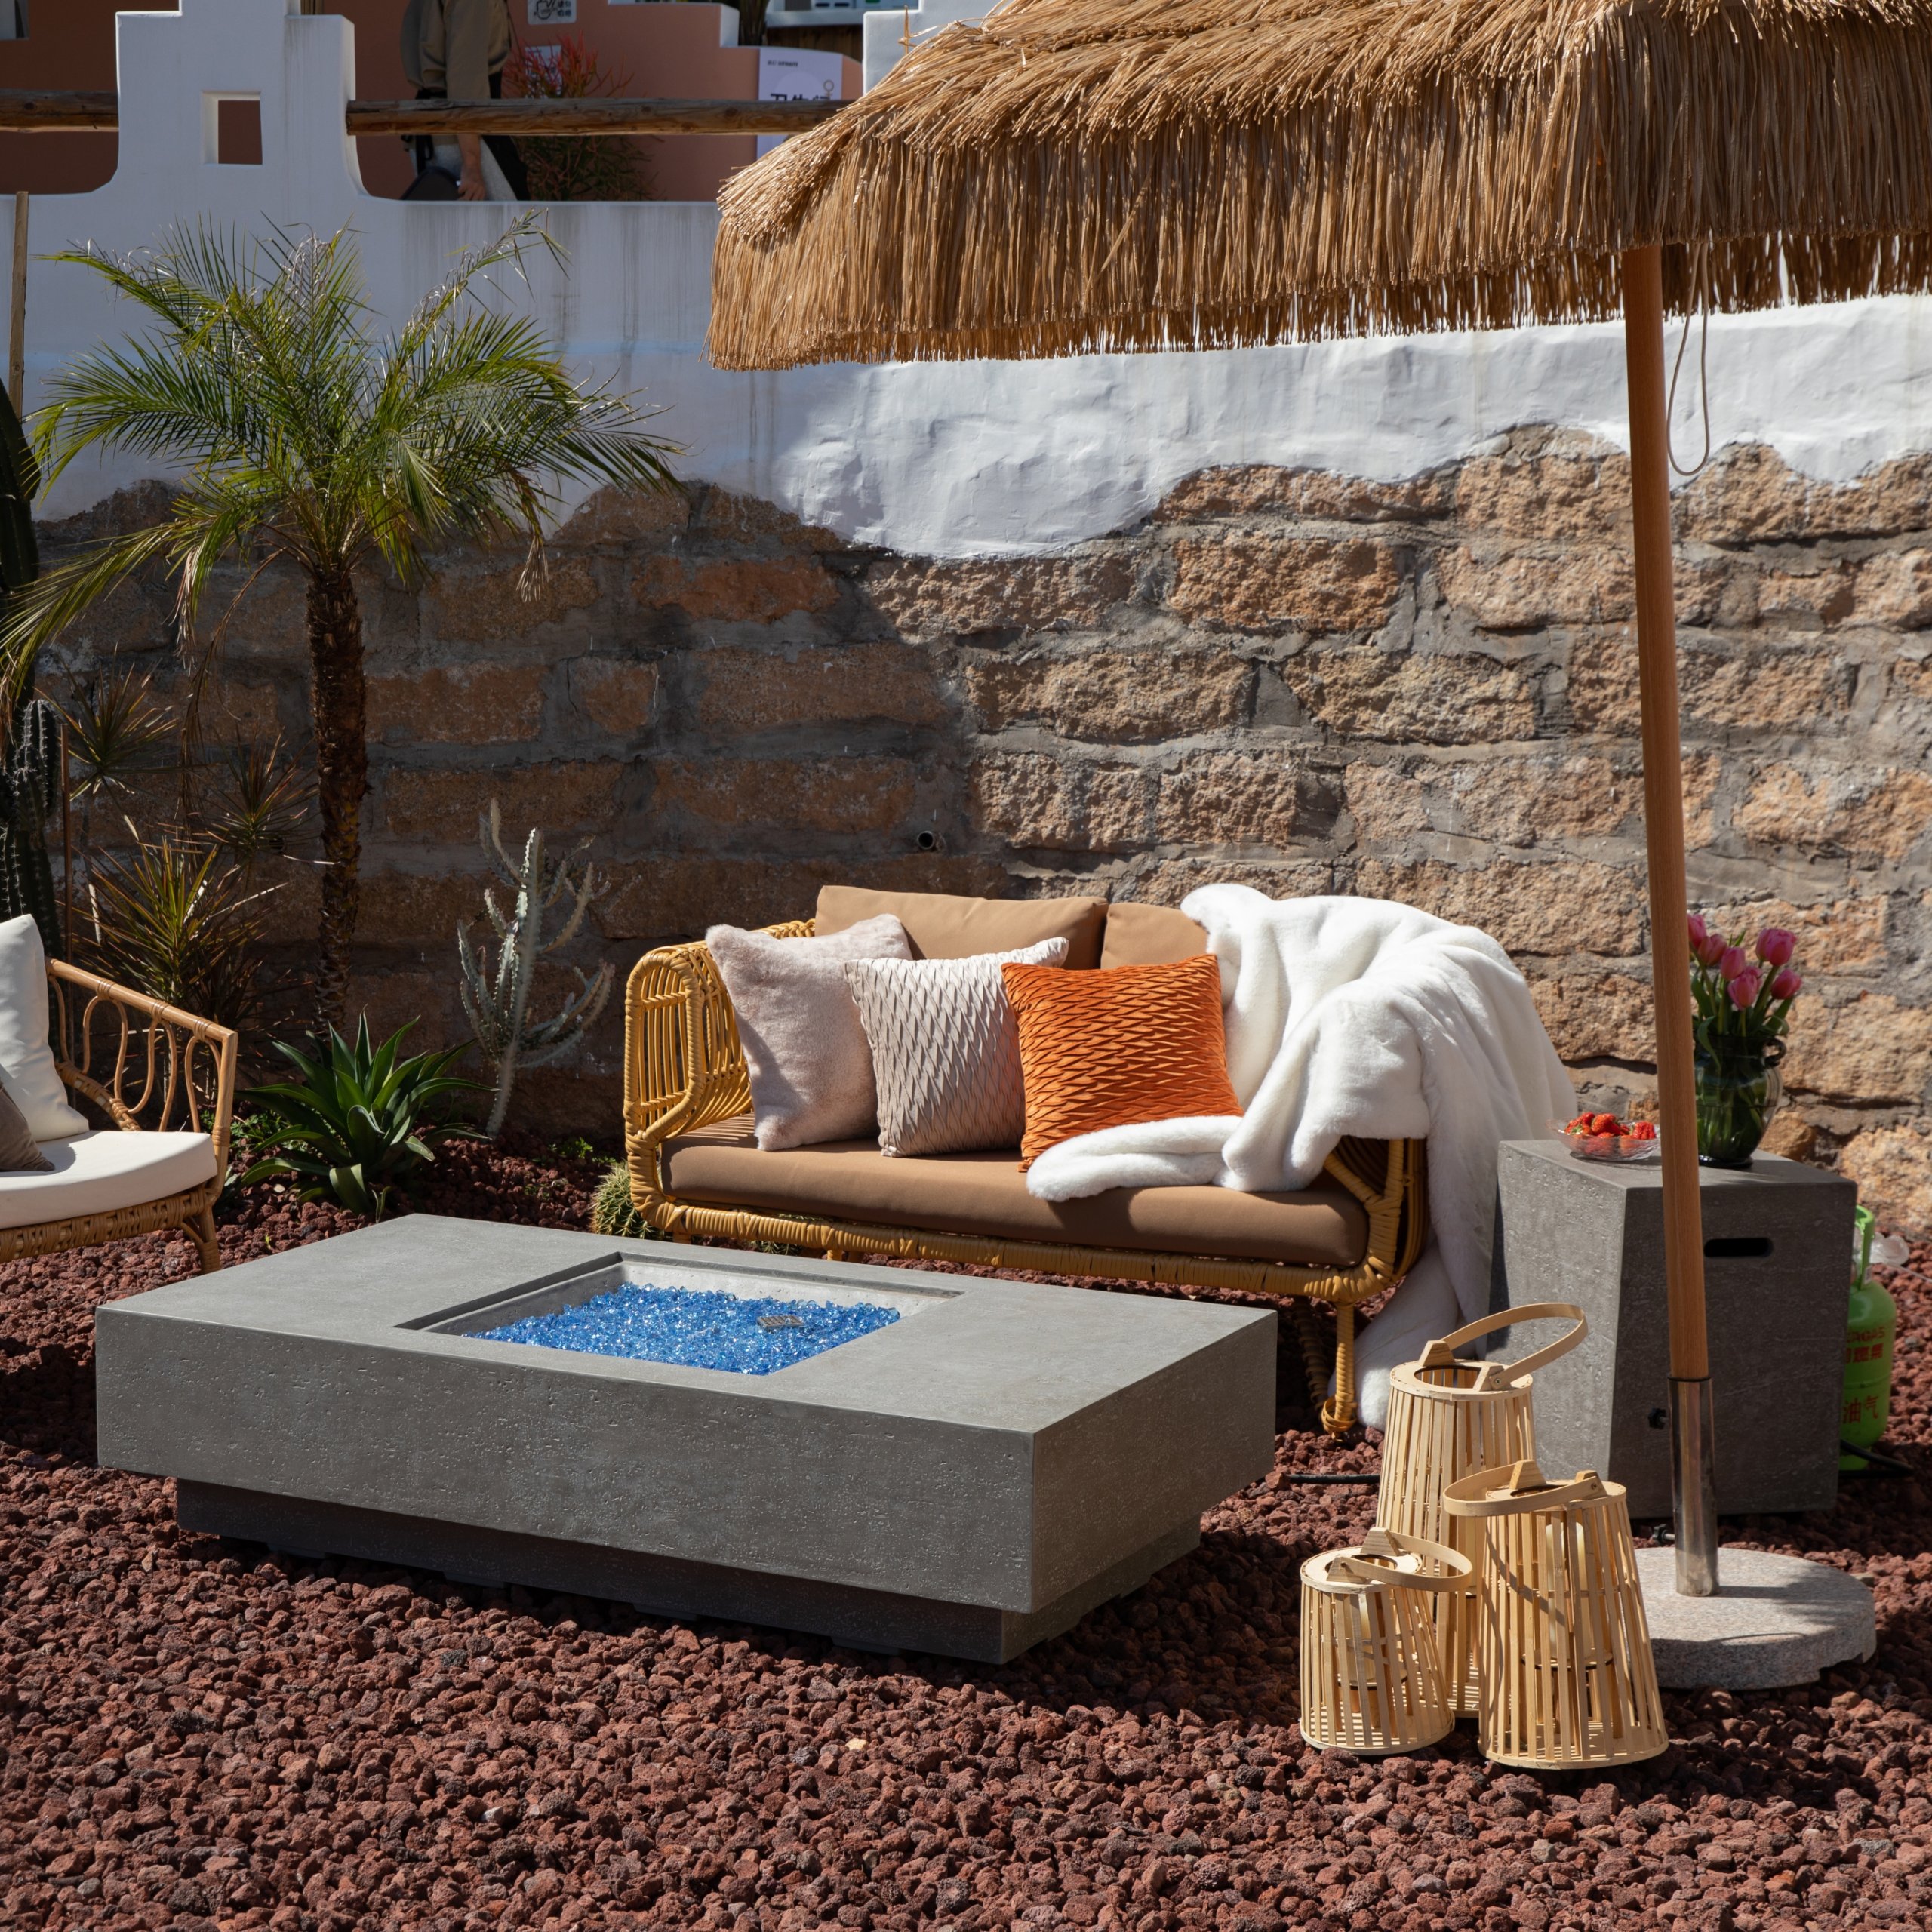 Monte Carlo firepit from suns lifestyle